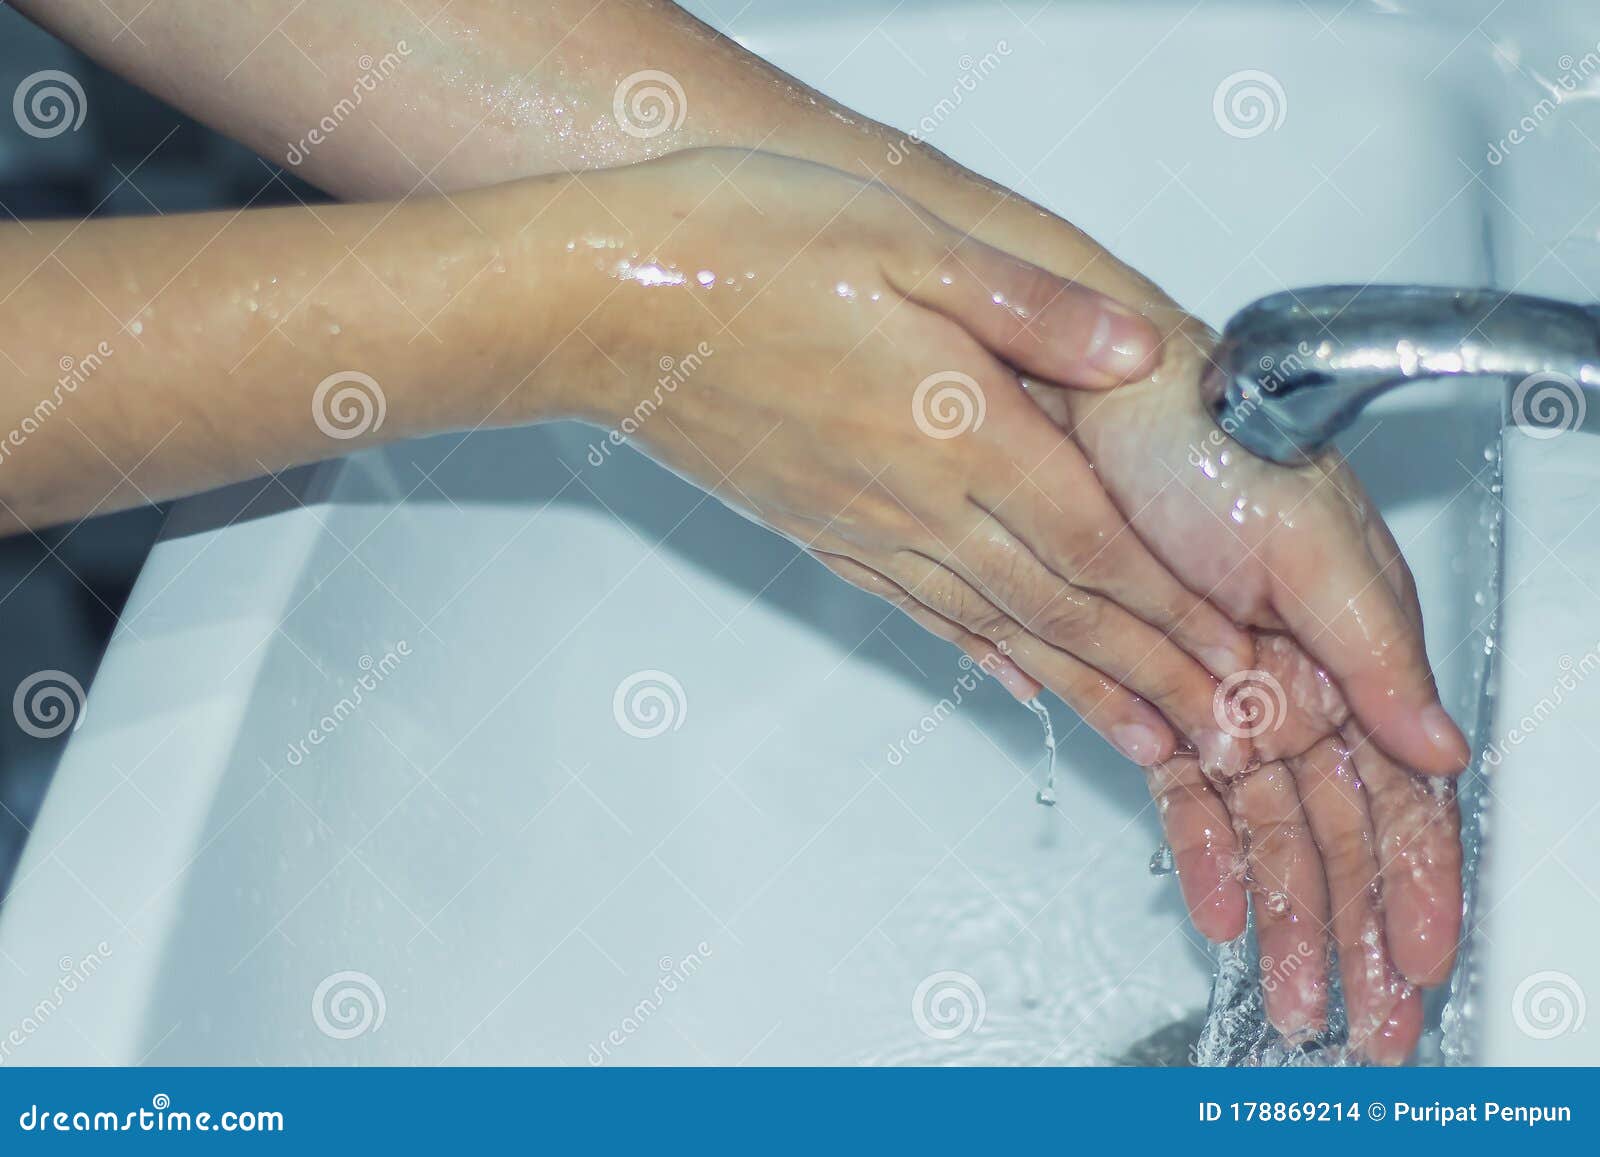 wash your hands with soap to prevent 19